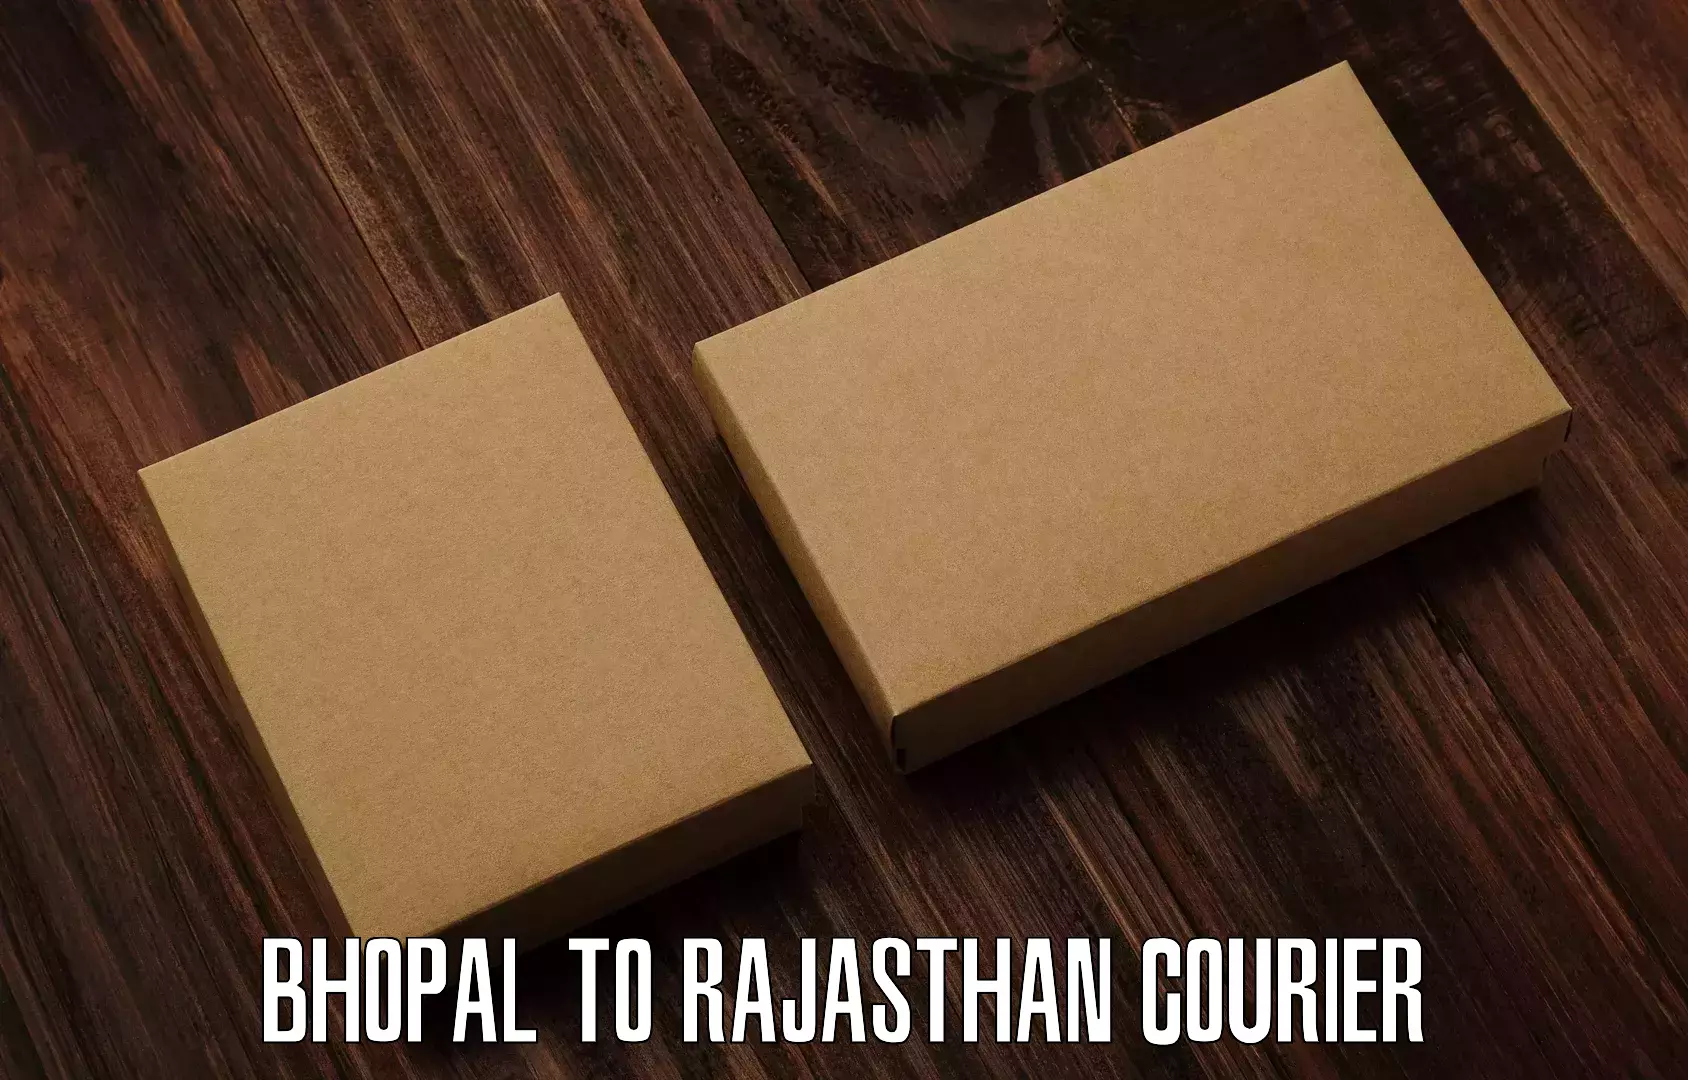 Business shipping needs Bhopal to Mathania